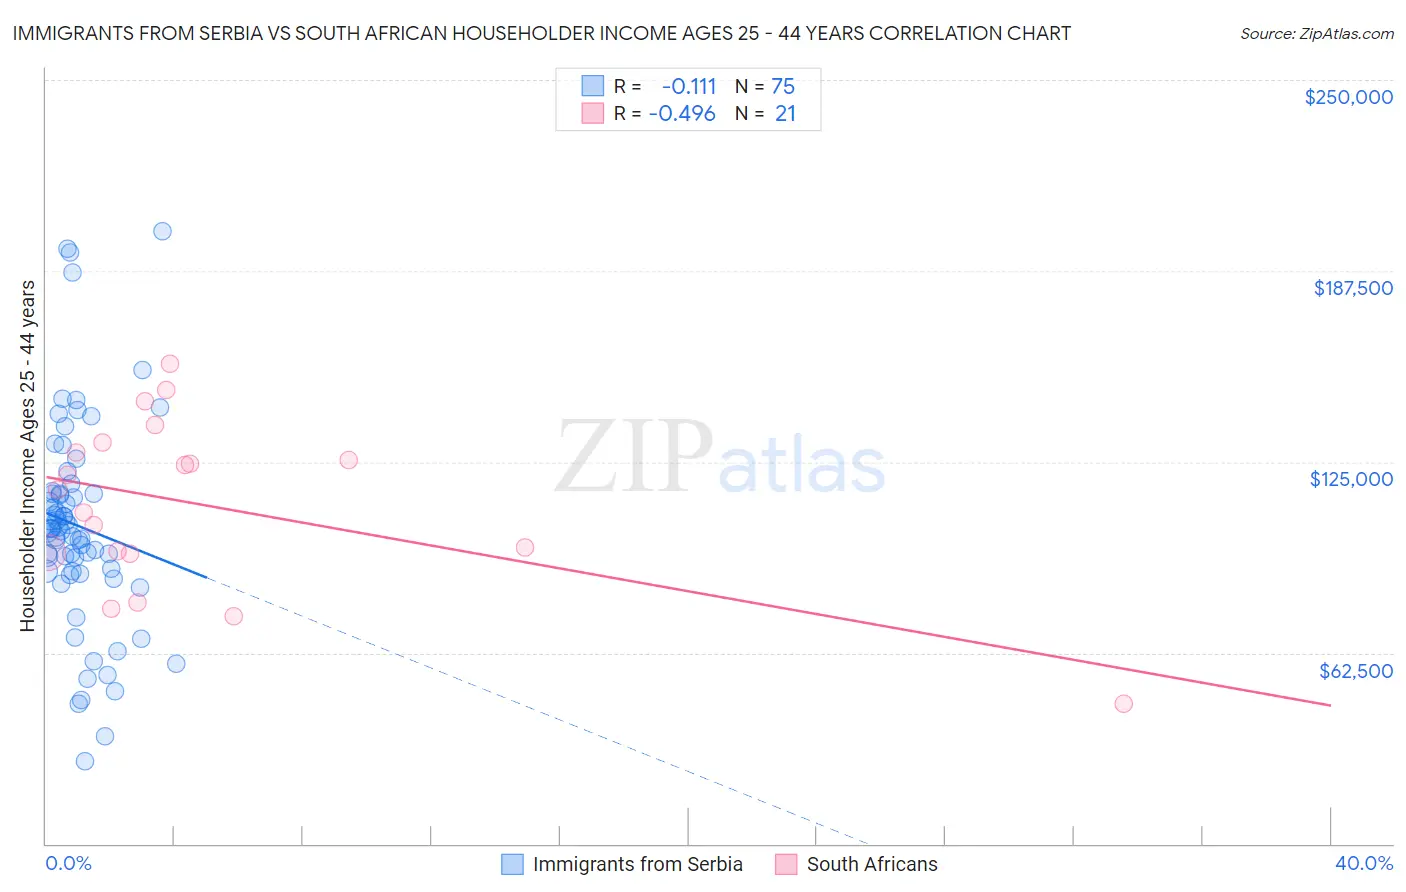 Immigrants from Serbia vs South African Householder Income Ages 25 - 44 years